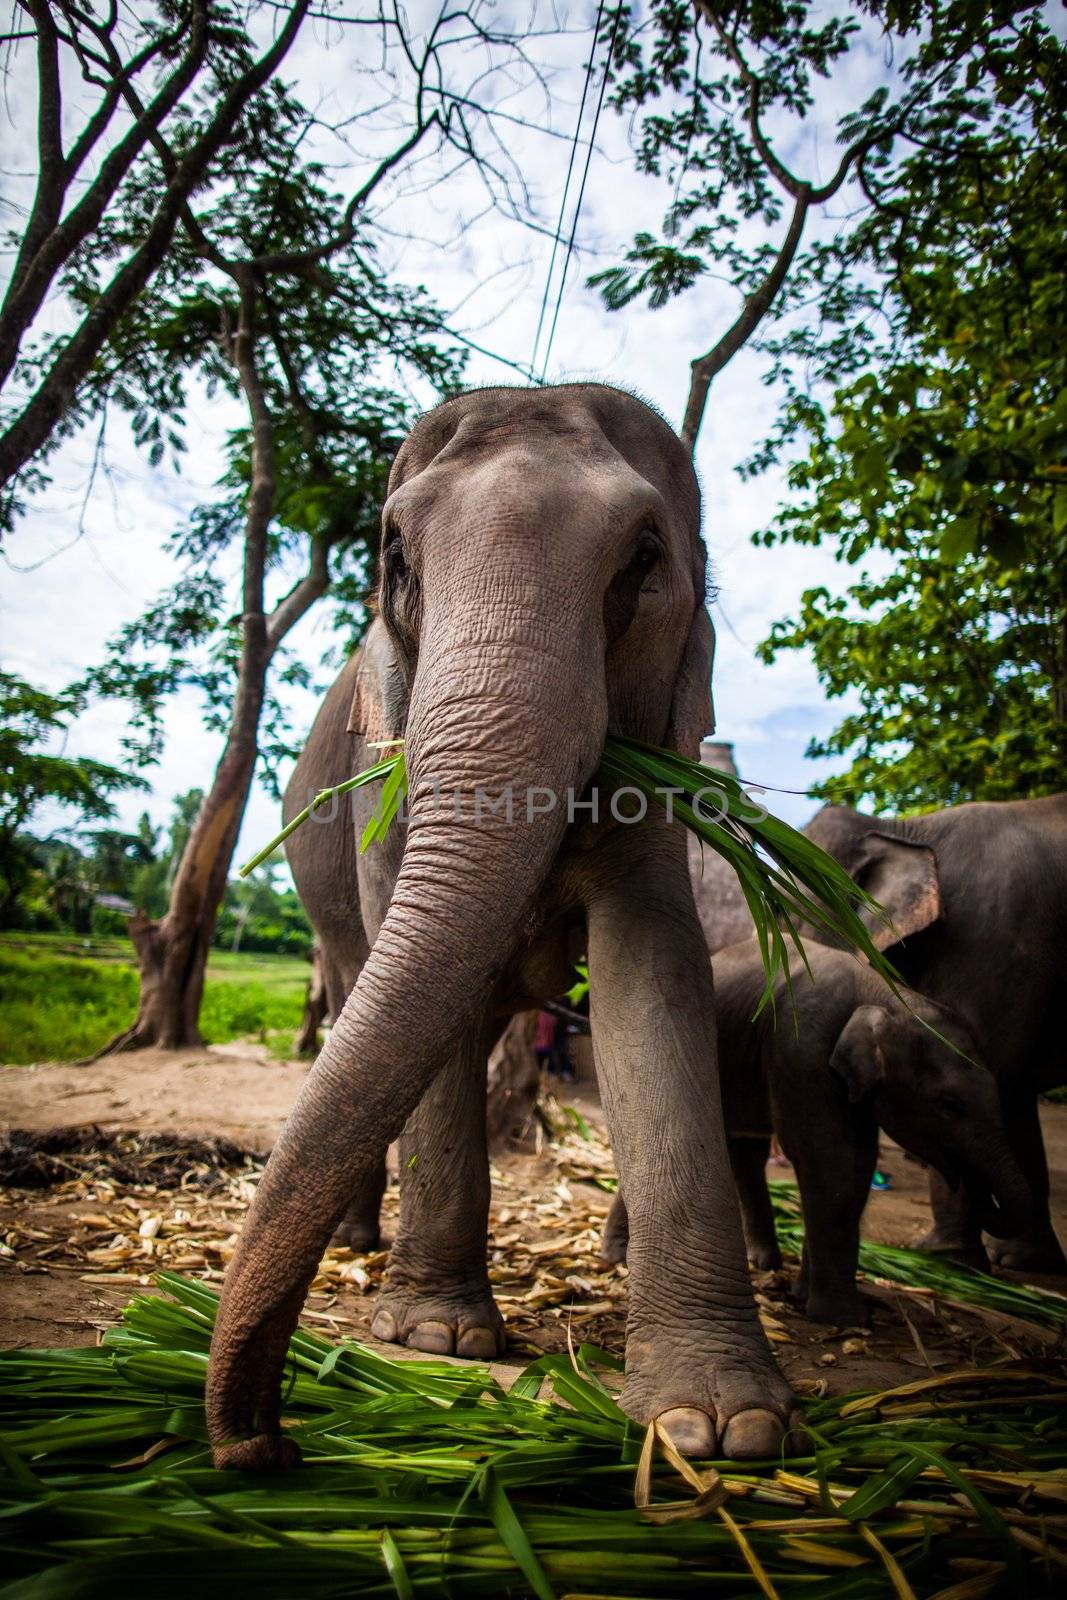 Mature female elephant with sugarcane in its mouth eating off the ground by hangingpixels